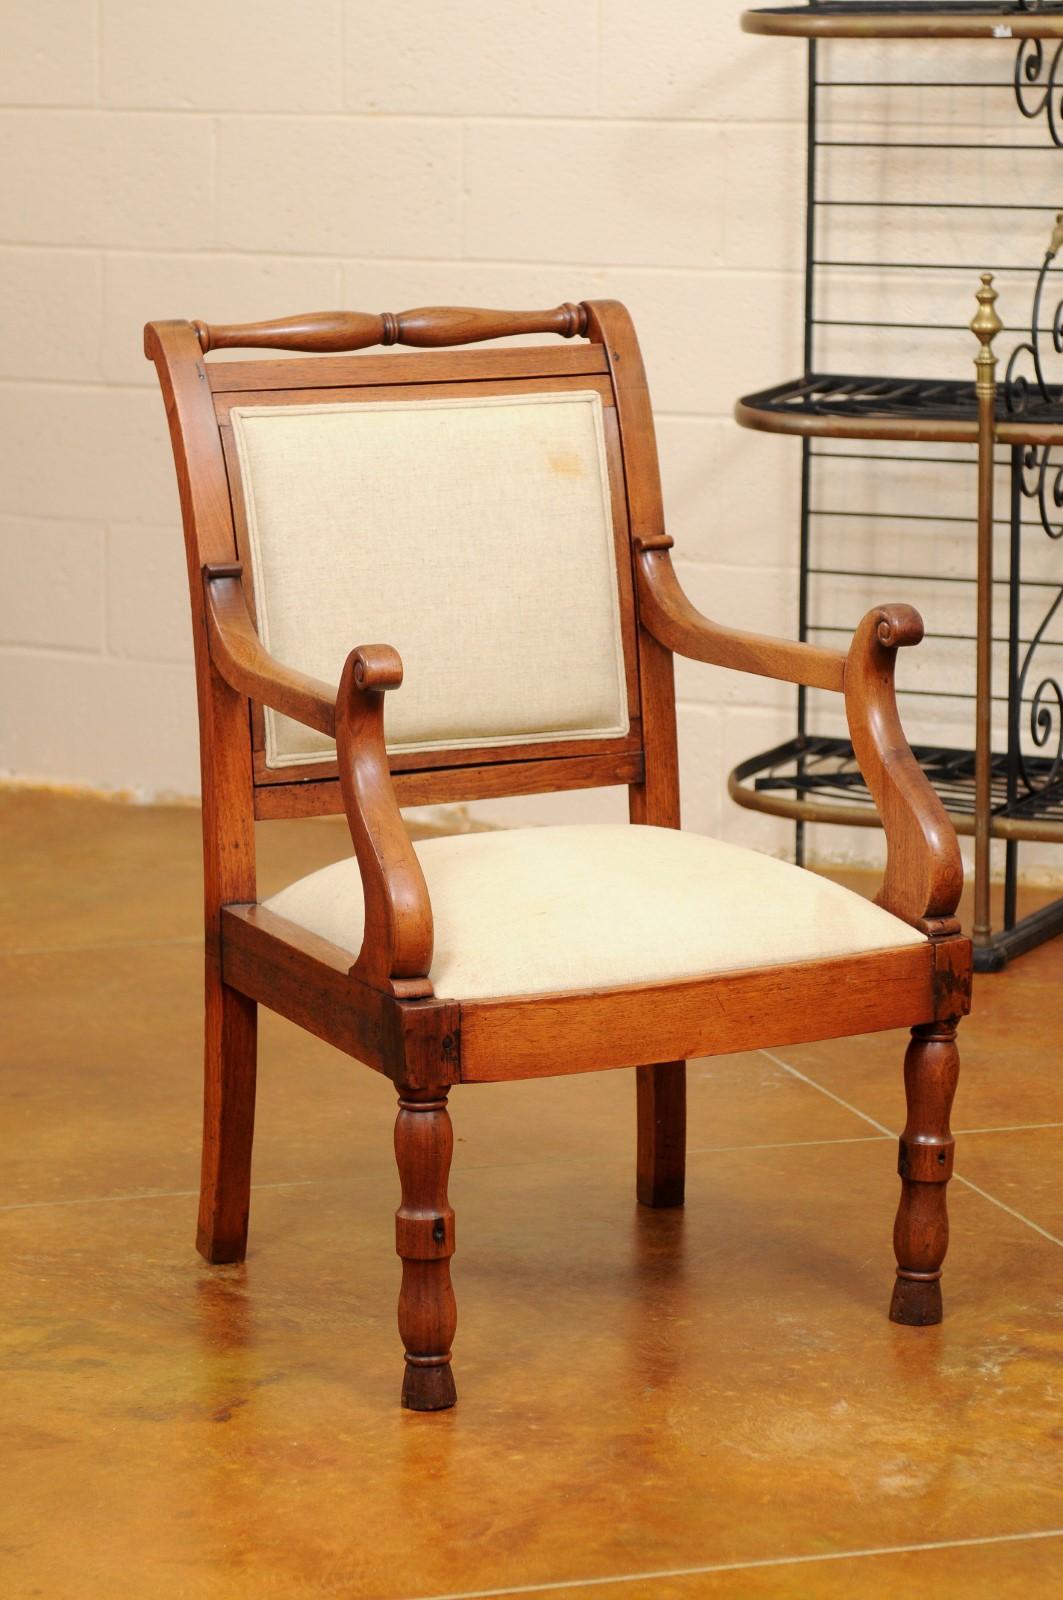 Mid-19th century provincial French Fauteuil / open arm chair in walnut with unusual scroll arms and turned back rail and legs (front).